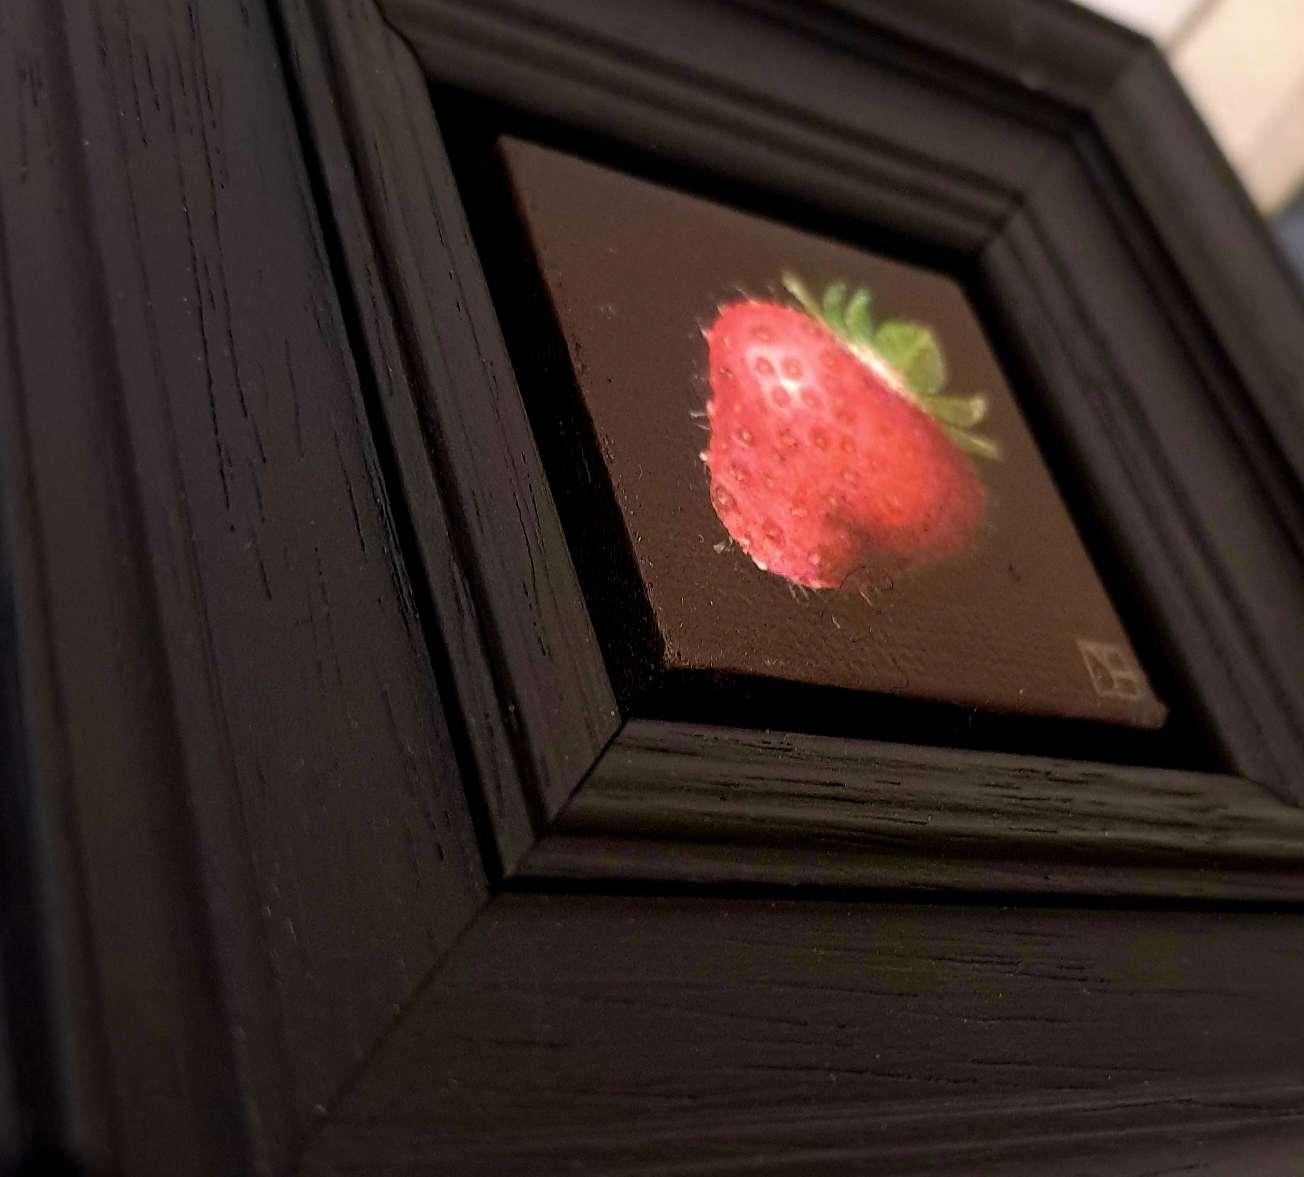 Pocket Very Ripe Strawberry, Original Painting, Still Life, Red, Black For Sale 2